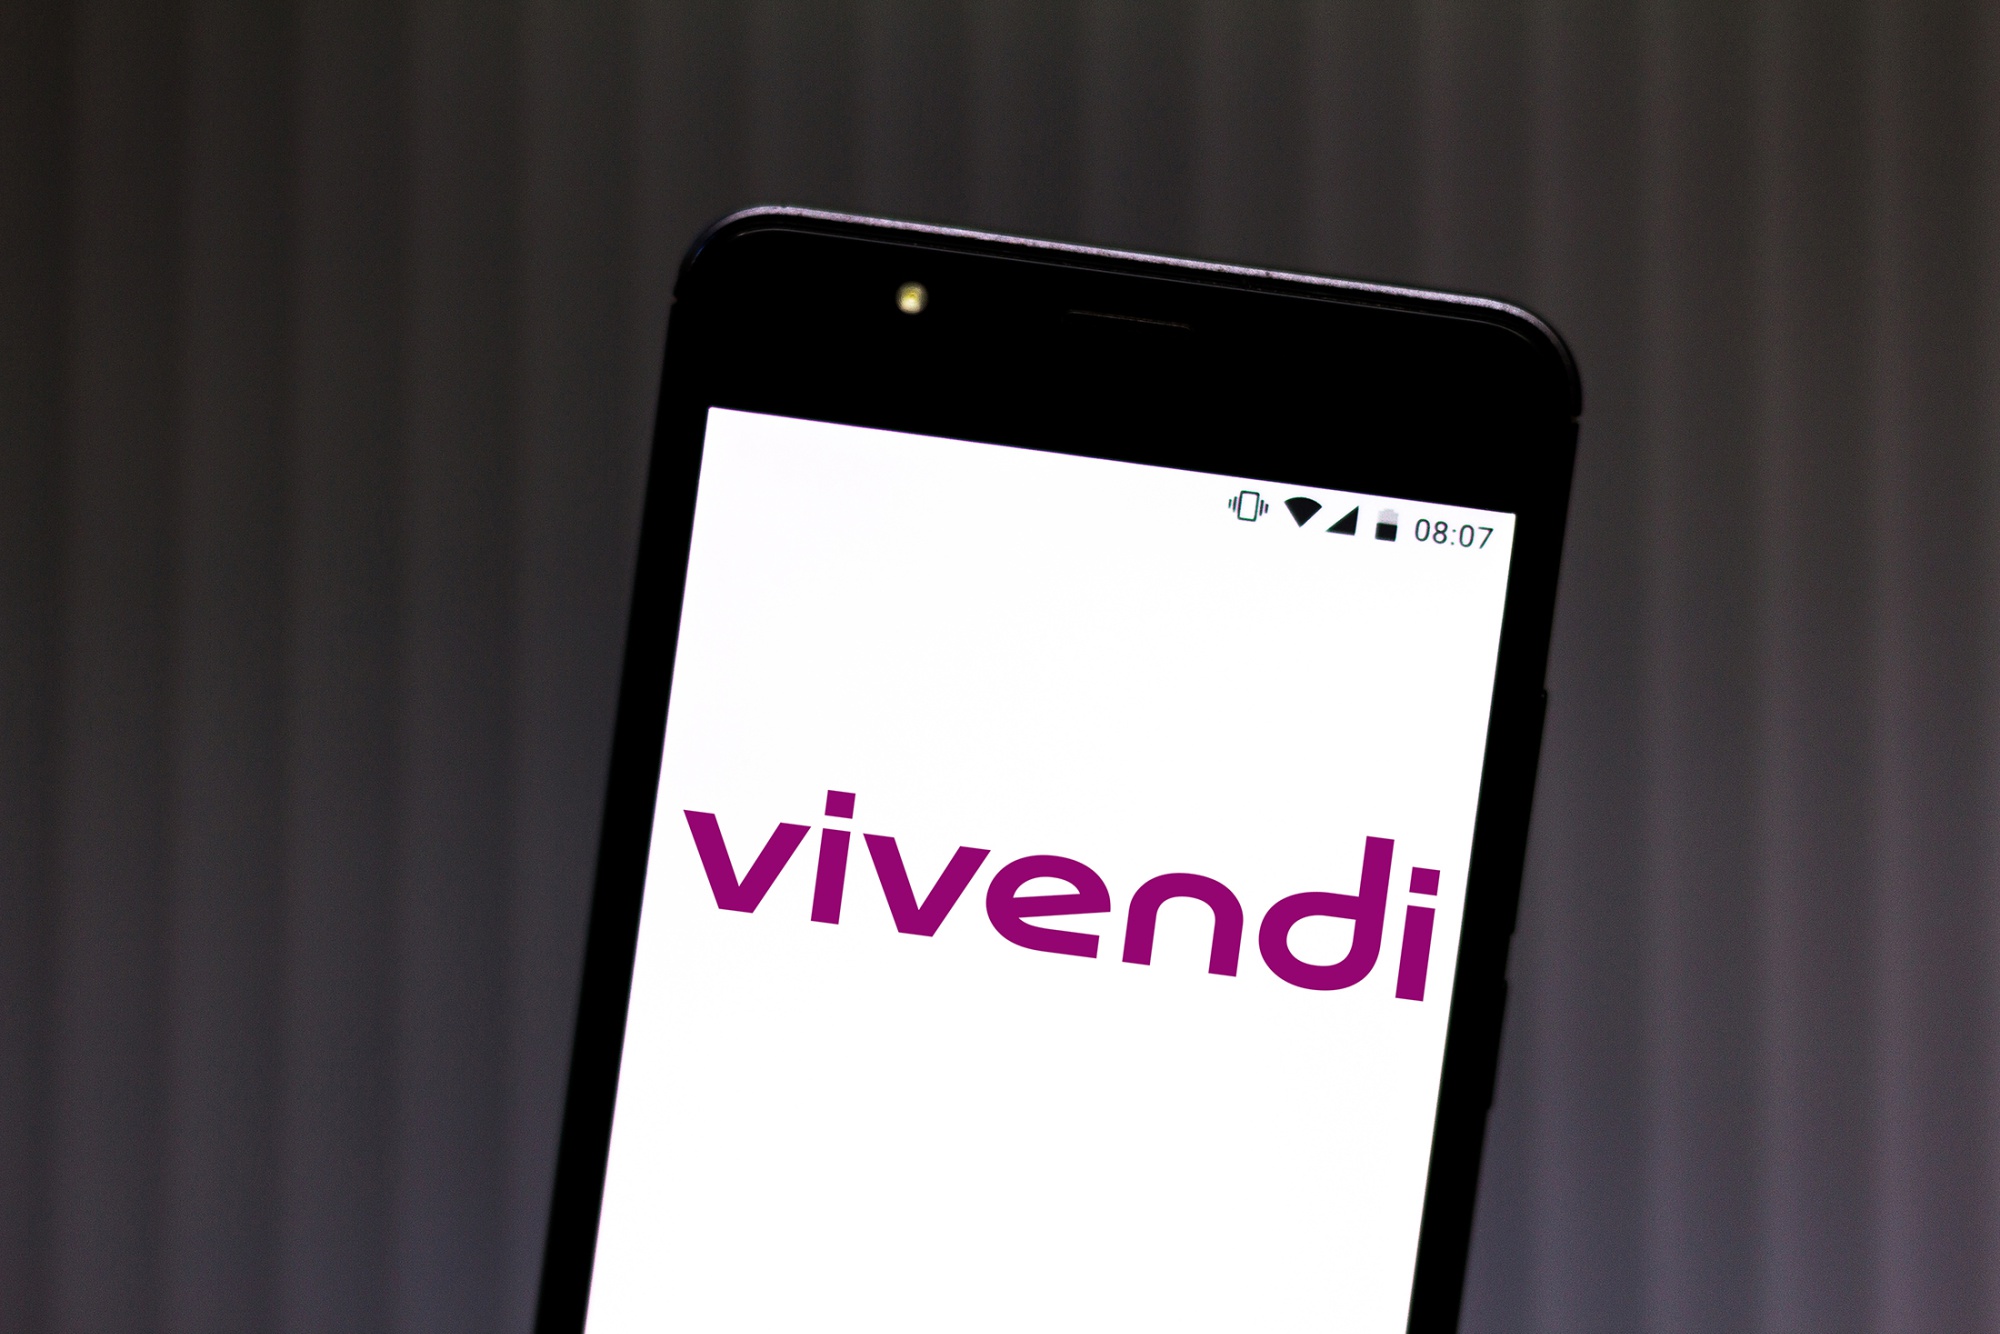 The Vivendi logo is displayed on a smartphone.&nbsp;